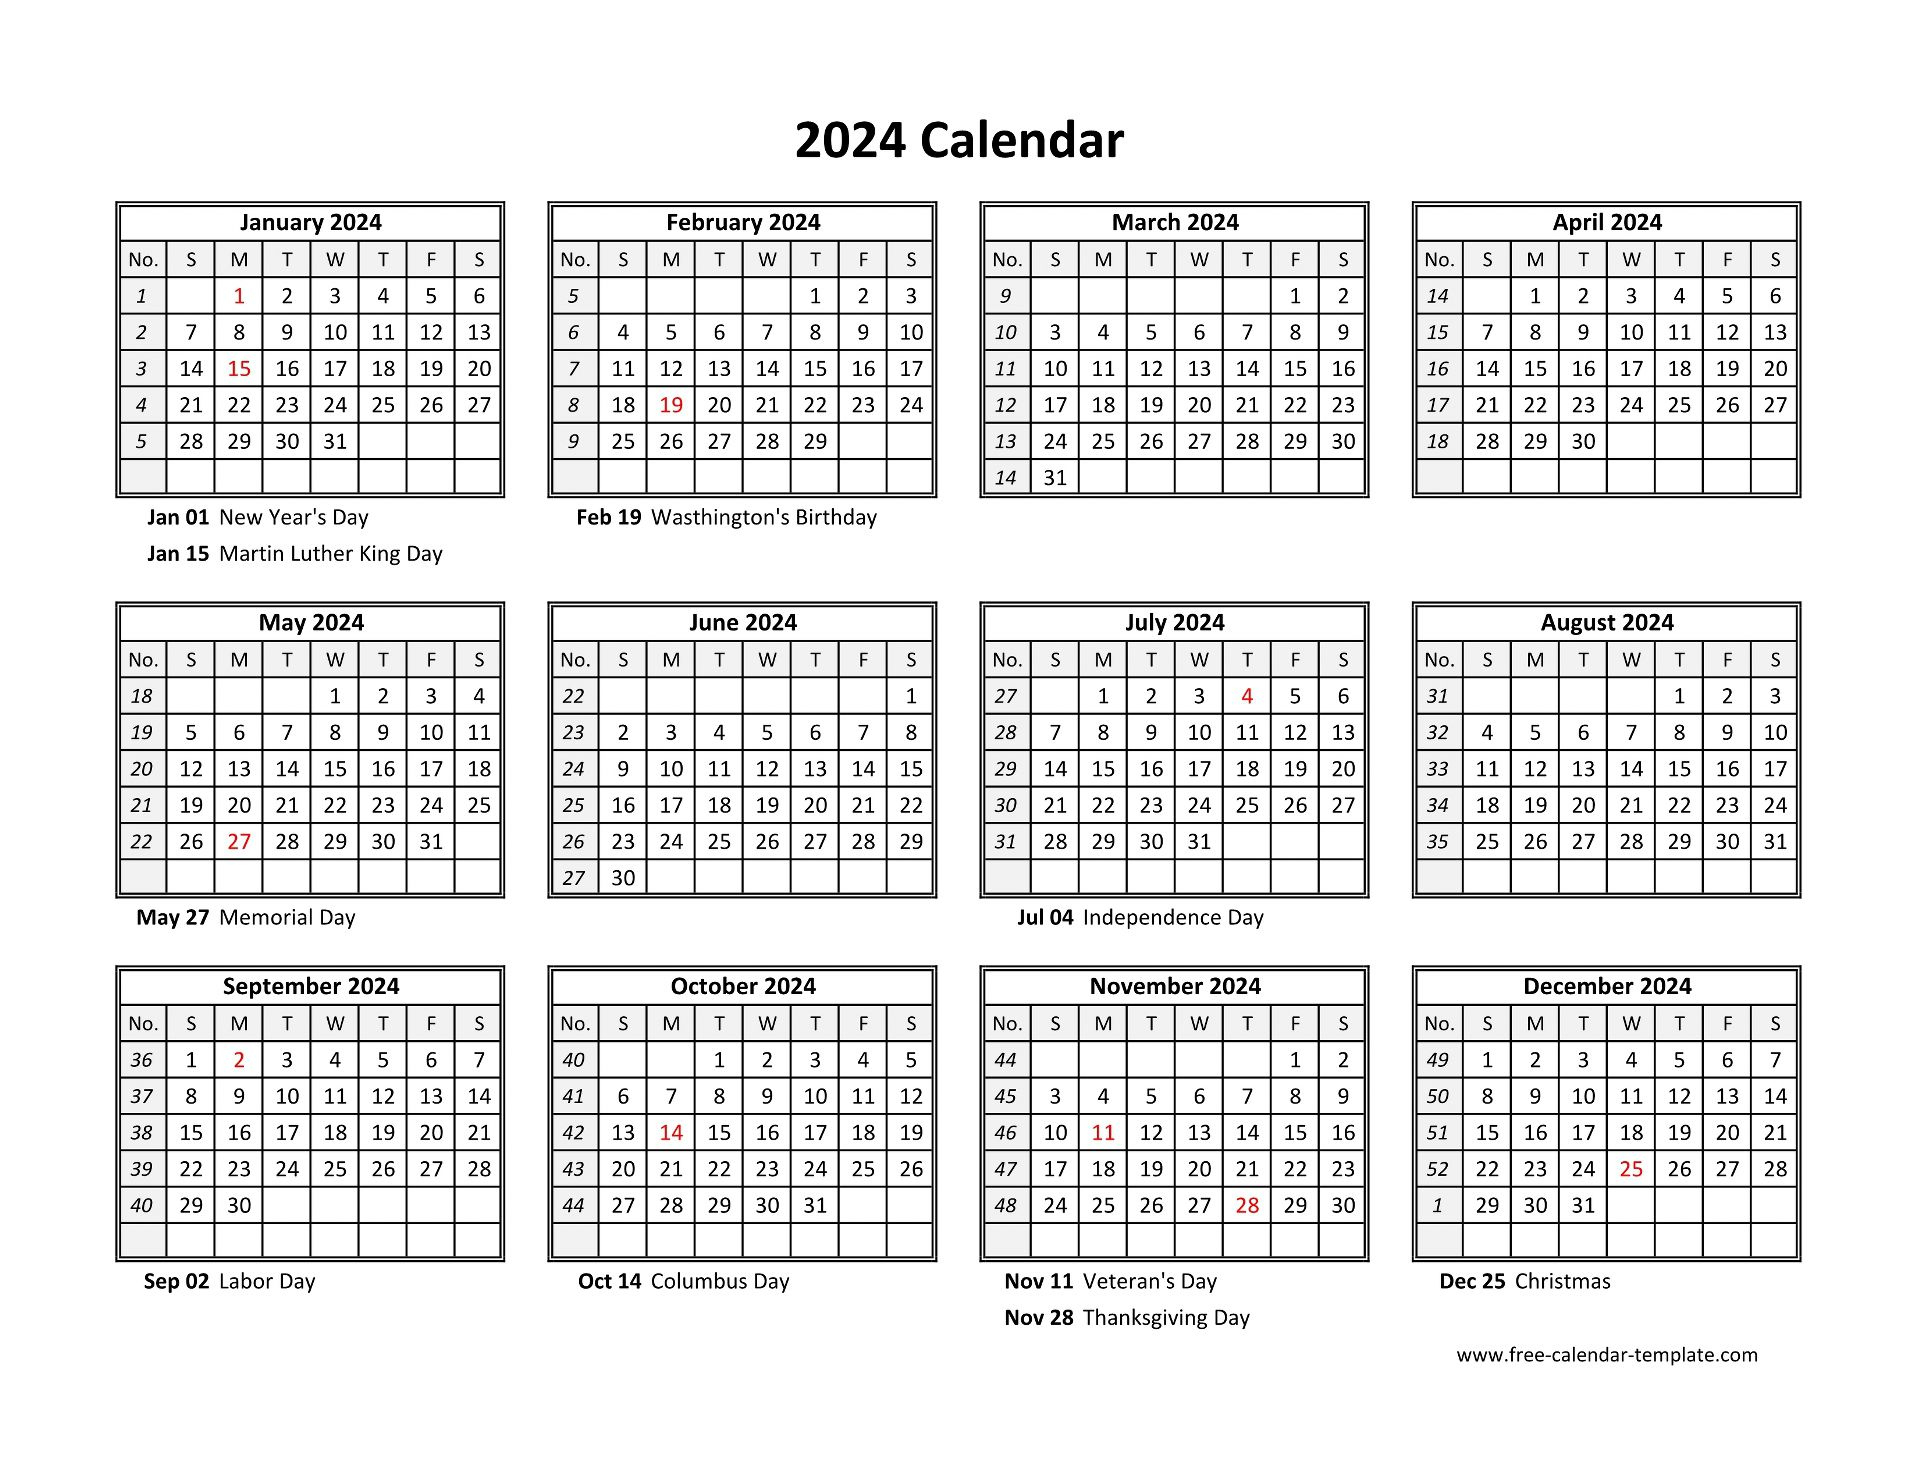 Yearly Calendar 2024 Printable With Federal Holidays | Free | 2024 Yearly Calendar By Month